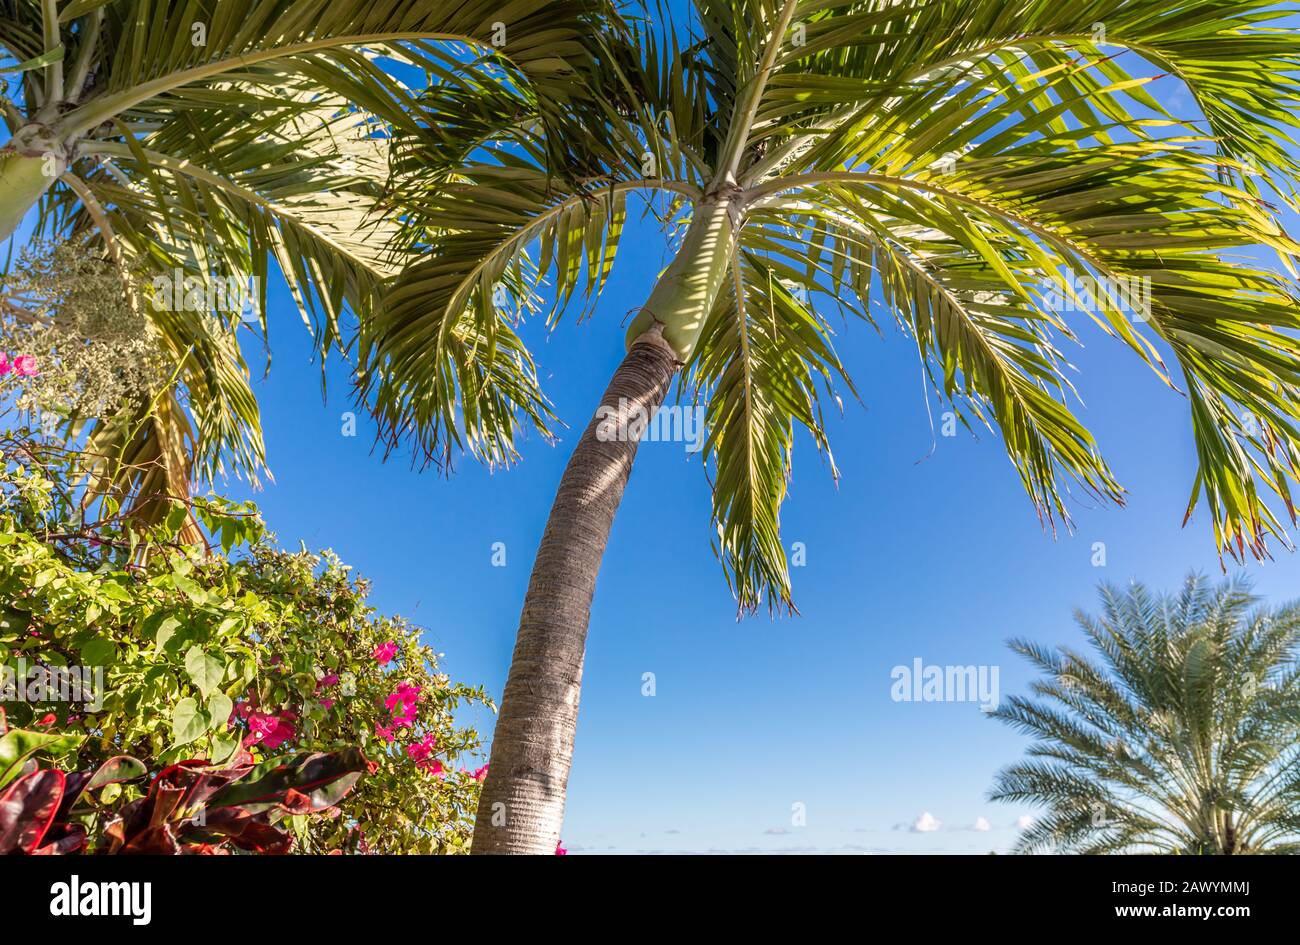 palm tree and flowering plants in St Martin Stock Photo